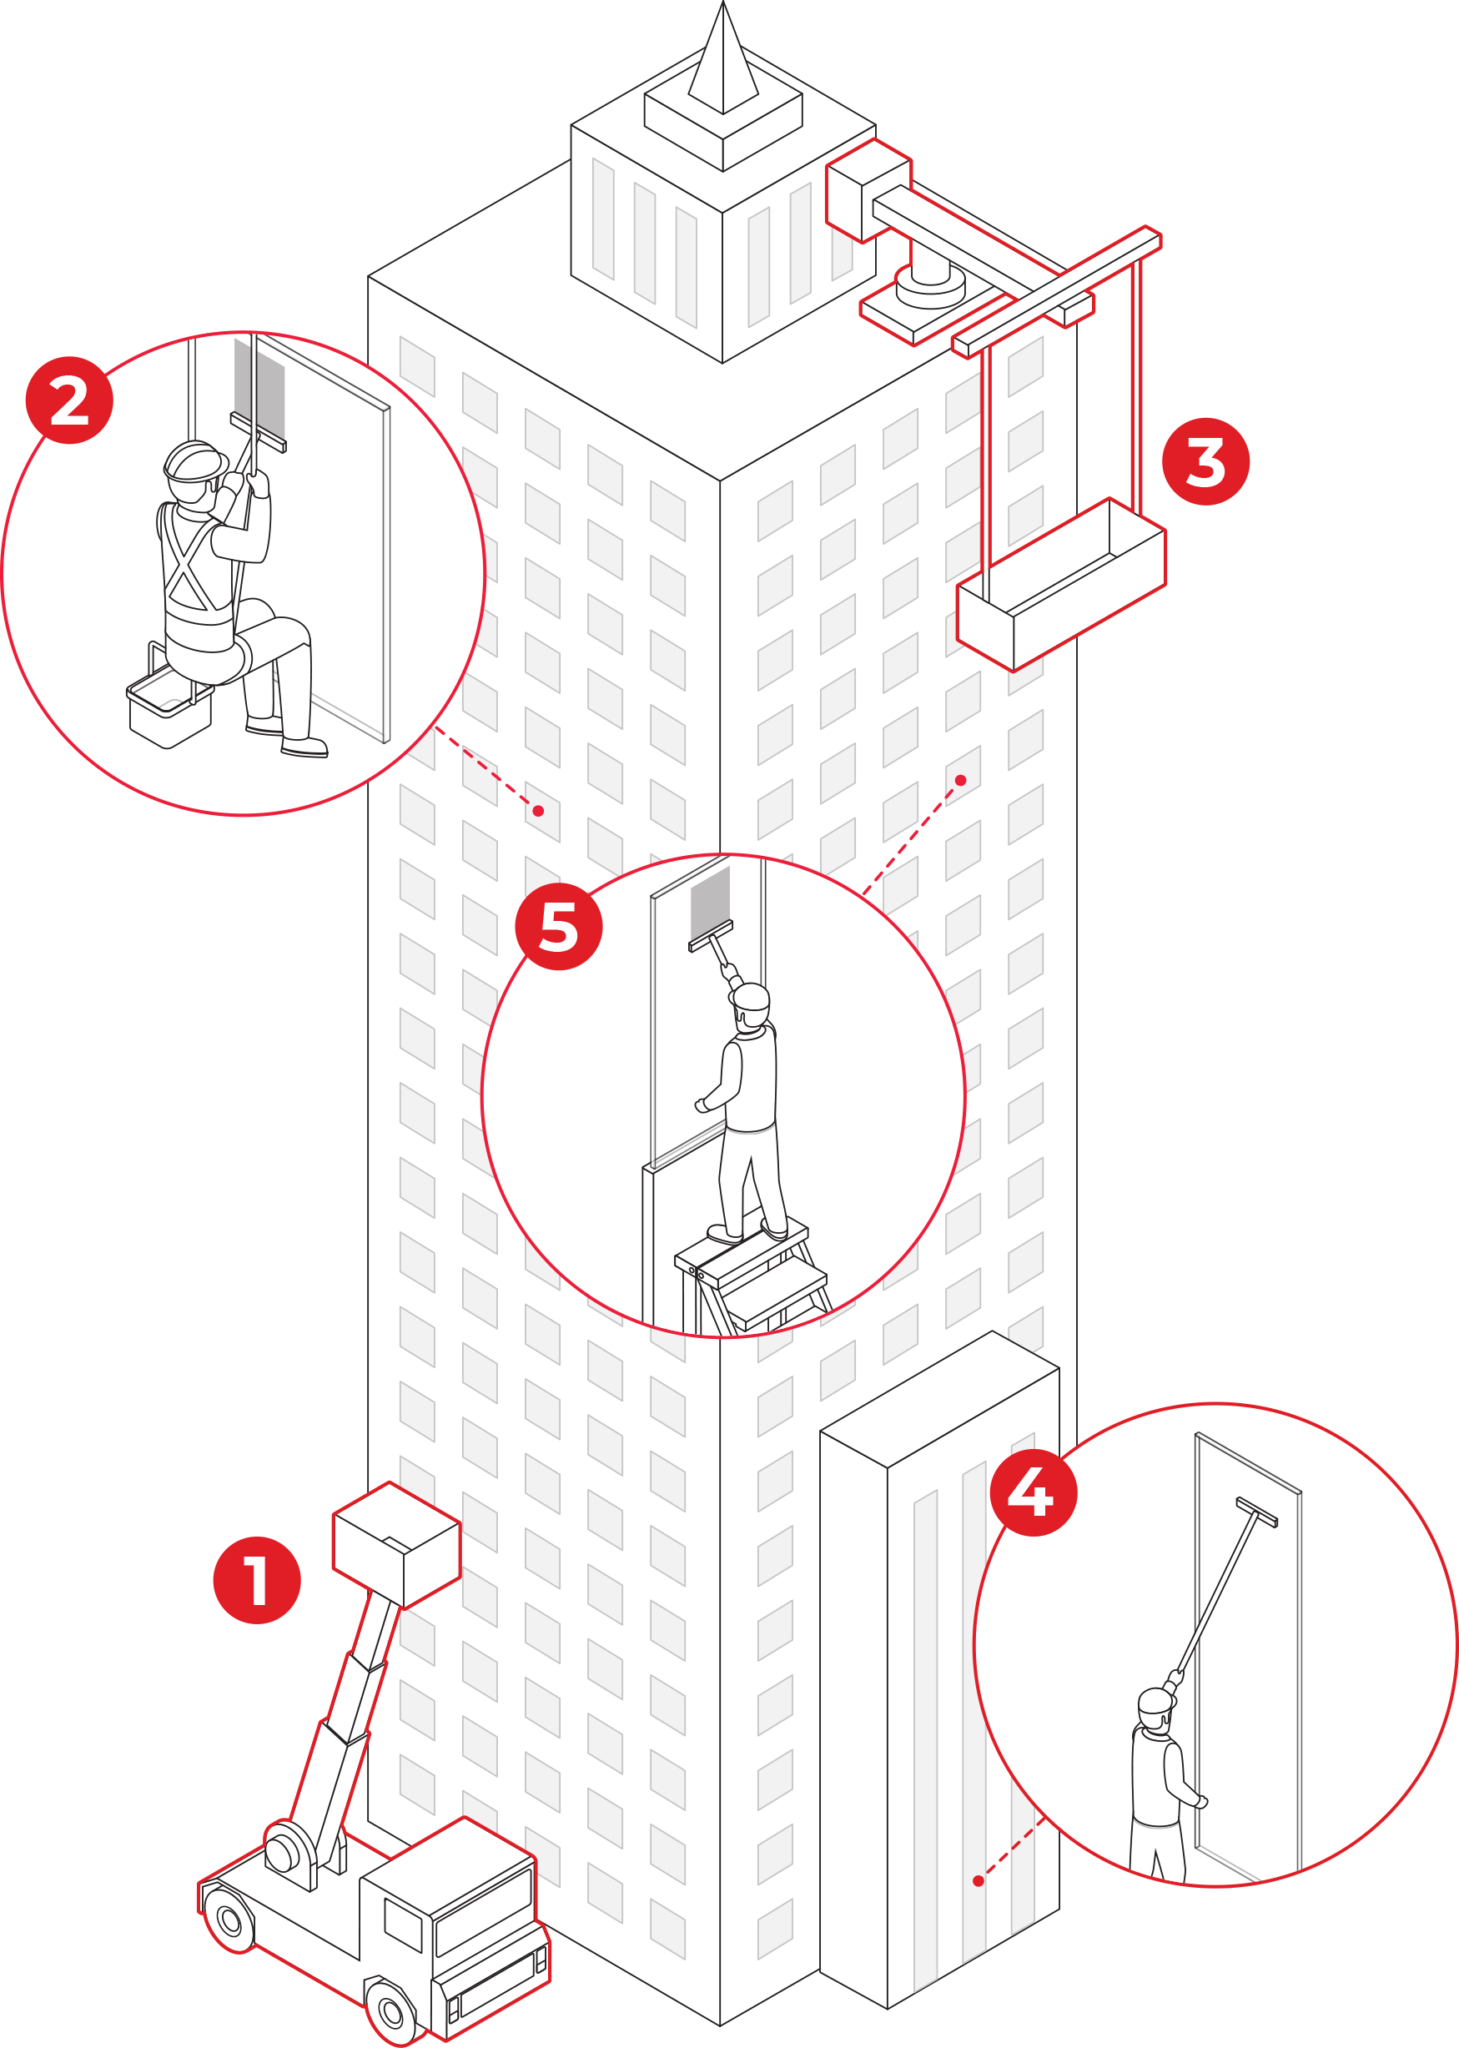 Window cleaning access methods